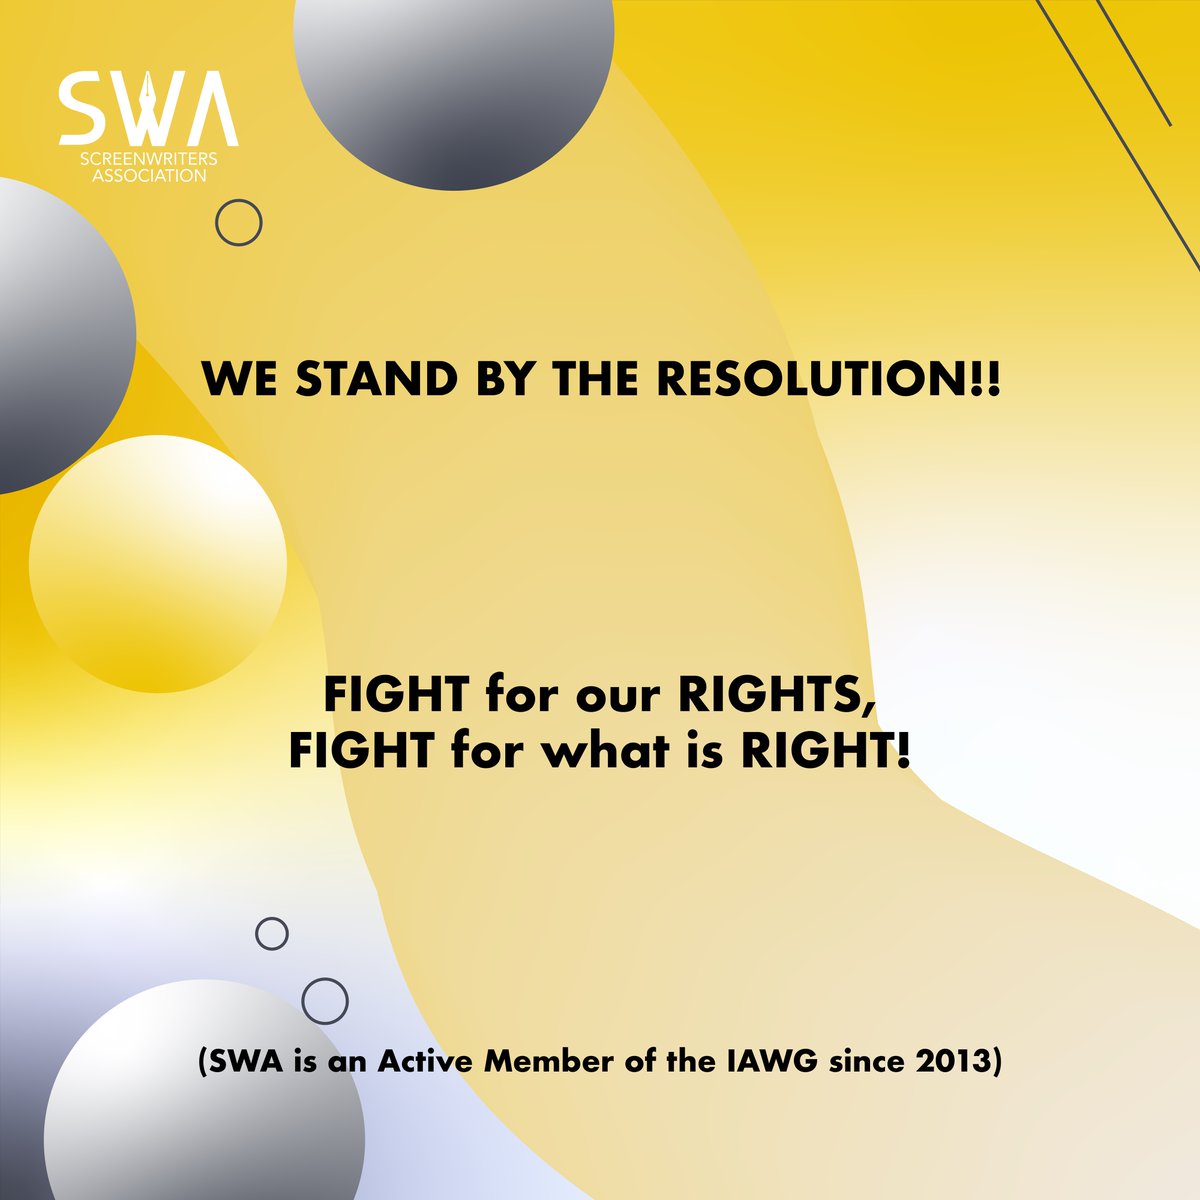 Stand with us for writers' rights! From sole creators to fair compensation, we're advocating for transparency & ethical standards in scriptwriting. @ScreenwritersEU & @IAWGs stand united, ensuring that AI enhances creativity without undermining the fundamental rights of writers.